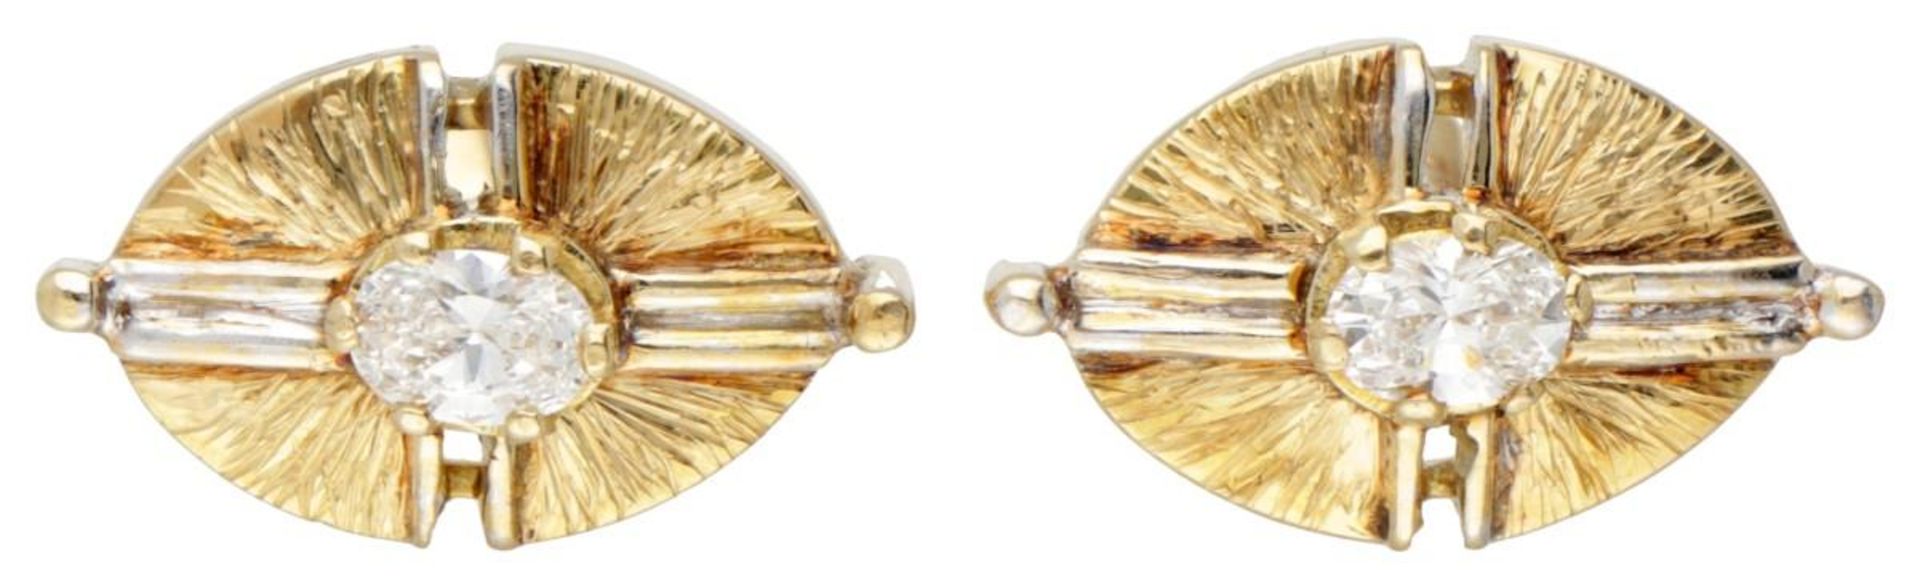 14K. Bicolor gold cufflinks set with approx. 0.65 ct. diamond. - Image 3 of 6